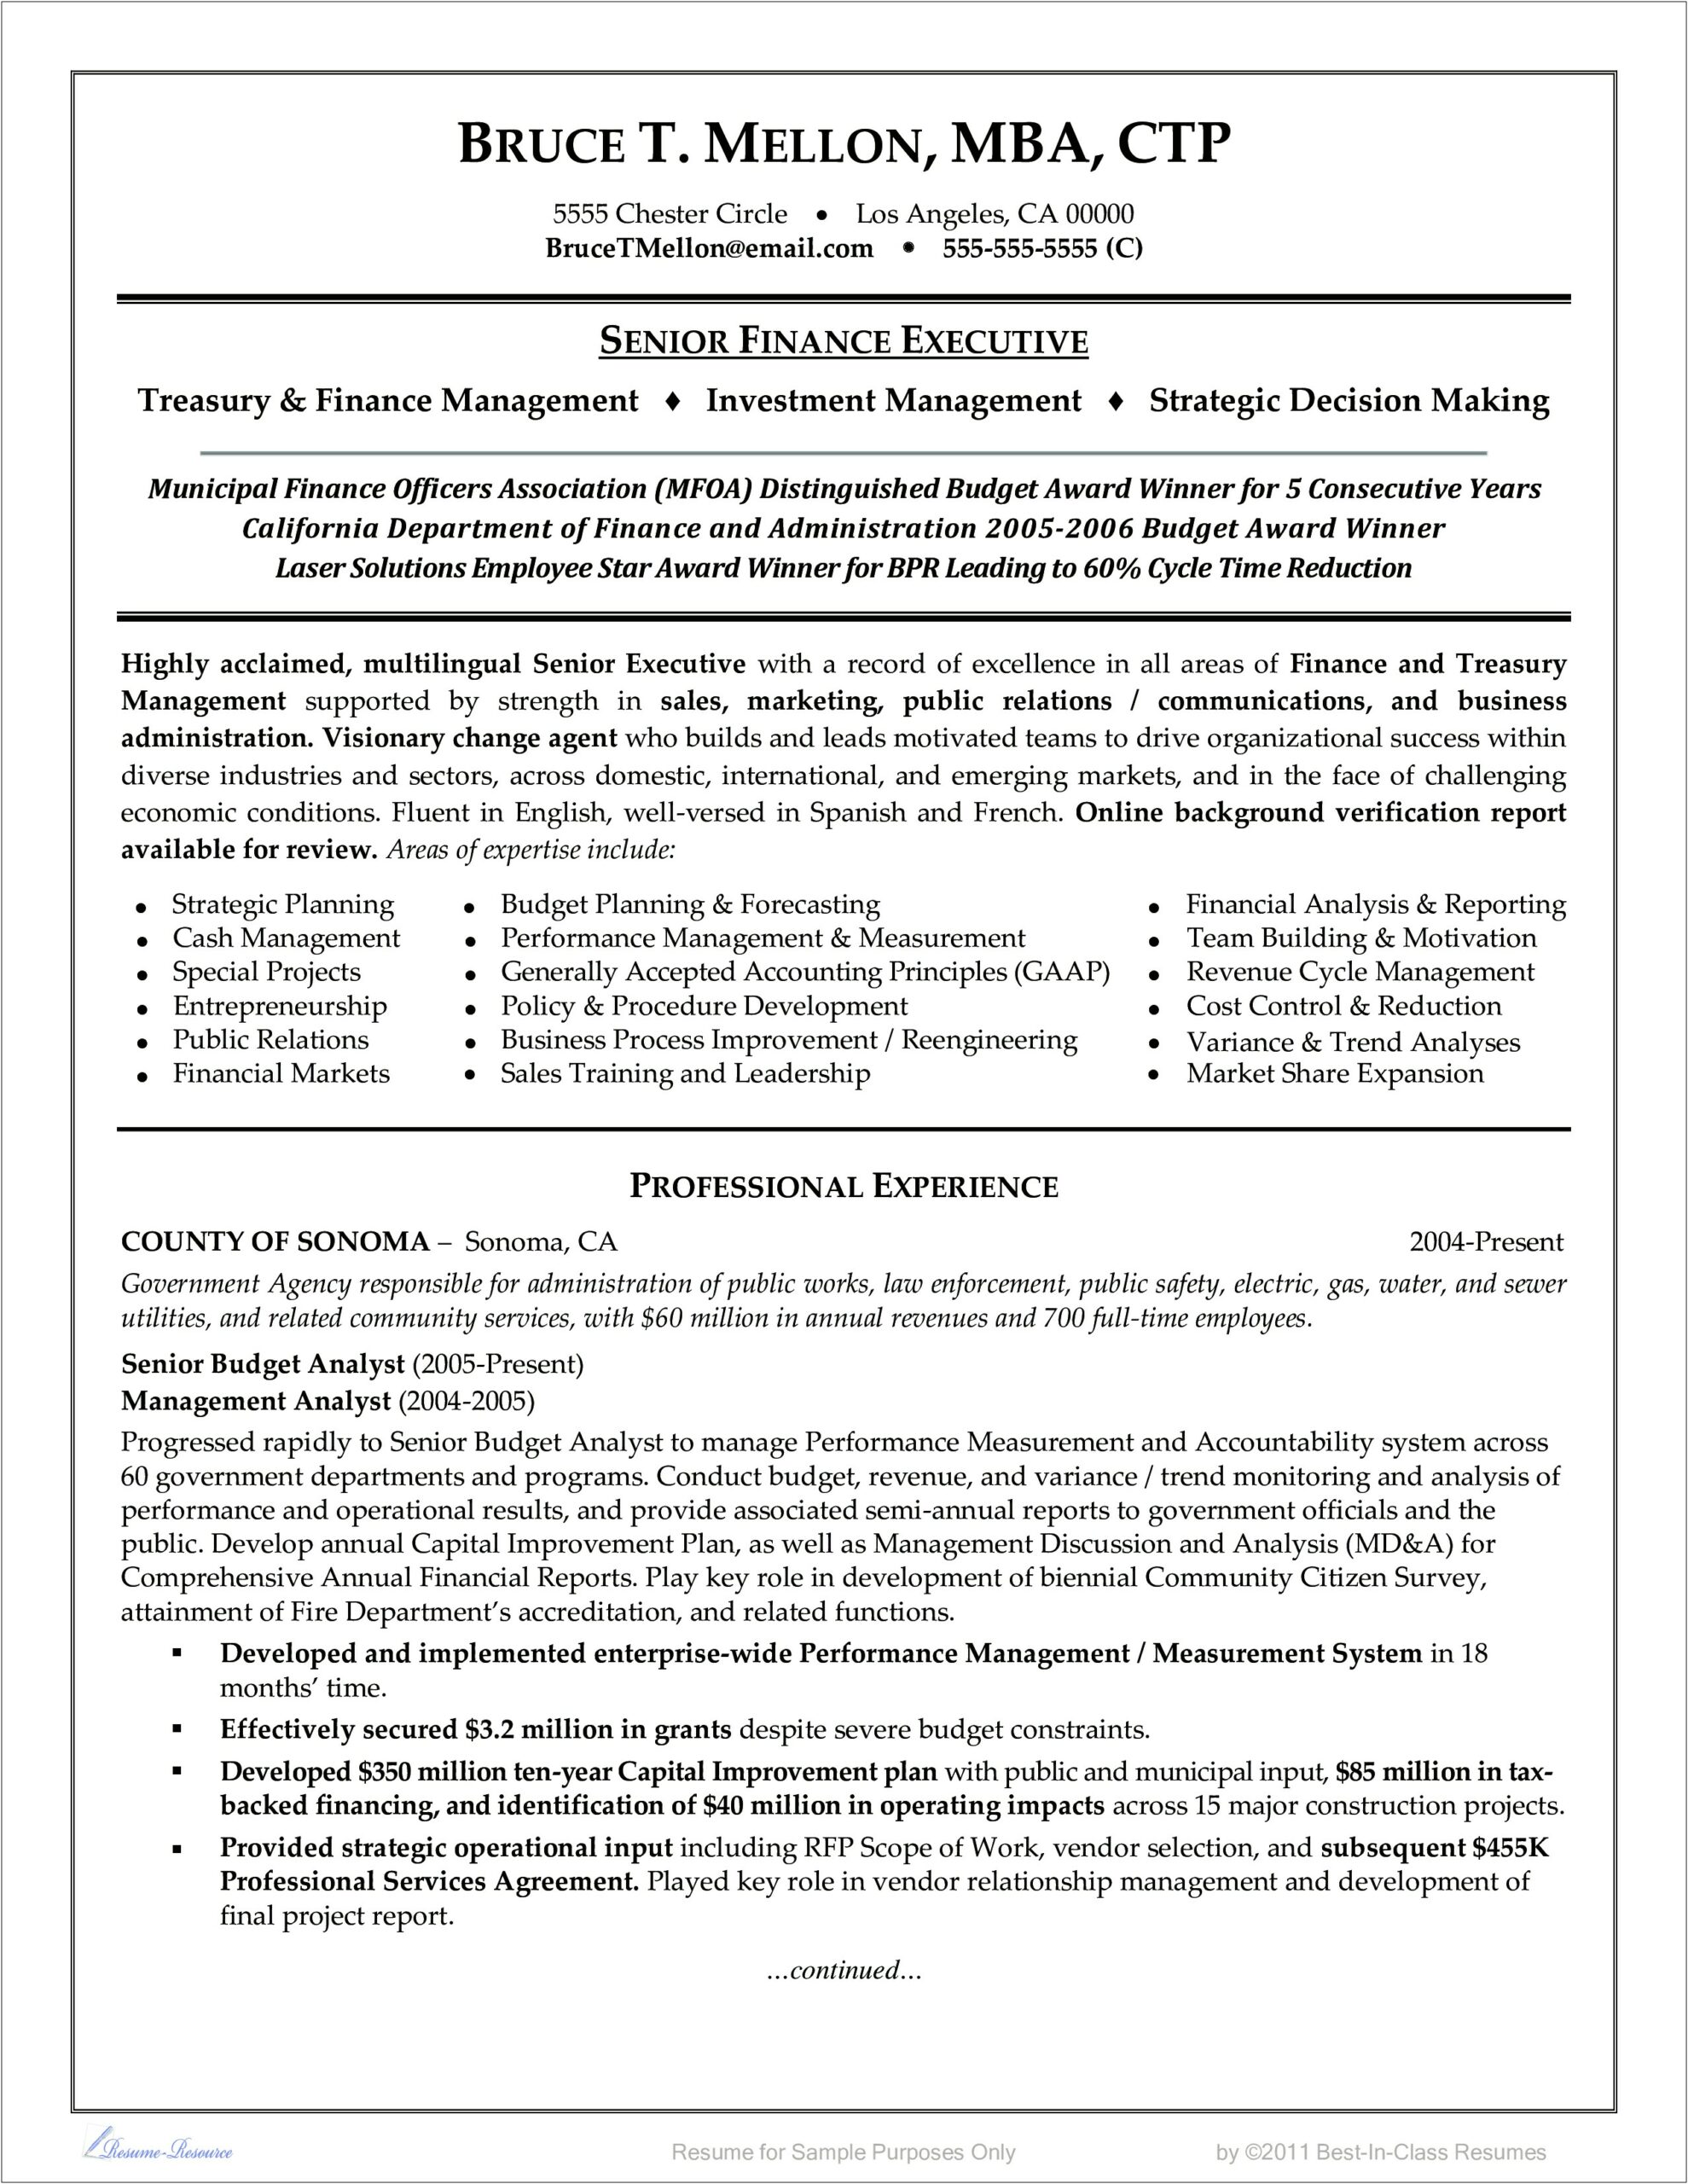 Functional Resume For Fiscal Management